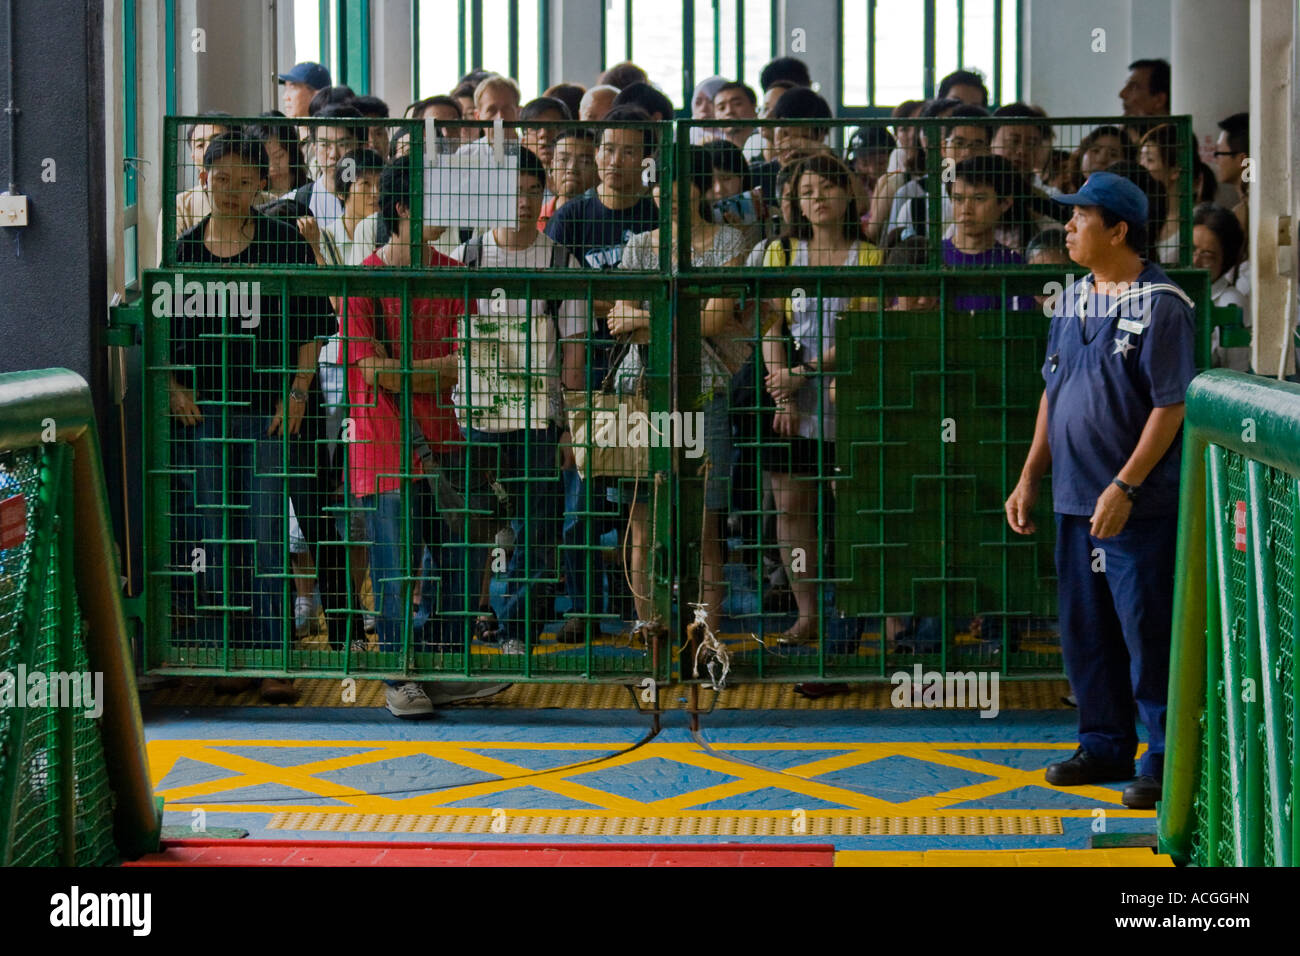 Passengers Wait behind the Gate to Board the Star Ferry Central Pier Hong Kong SAR Stock Photo